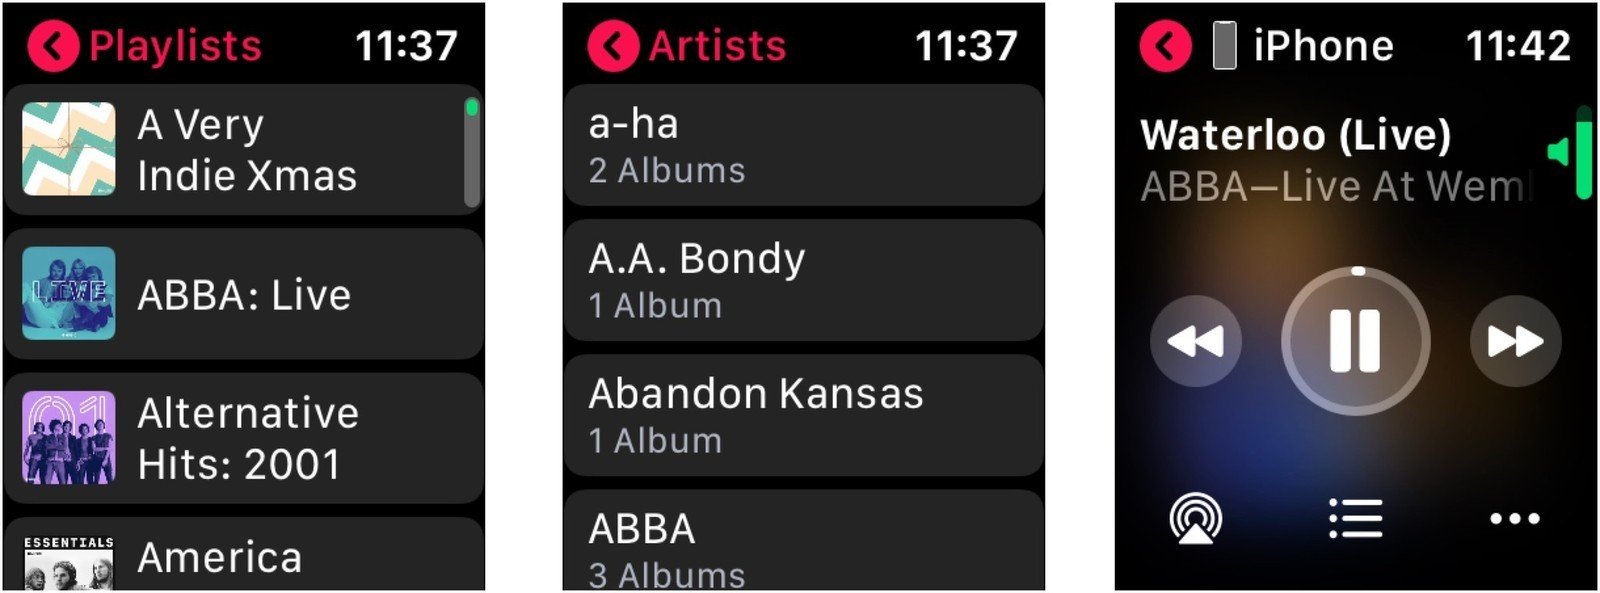 To control music from iPhone on Apple Watch, tap a category, then tap your selection to begin playing music from your iPhone. 